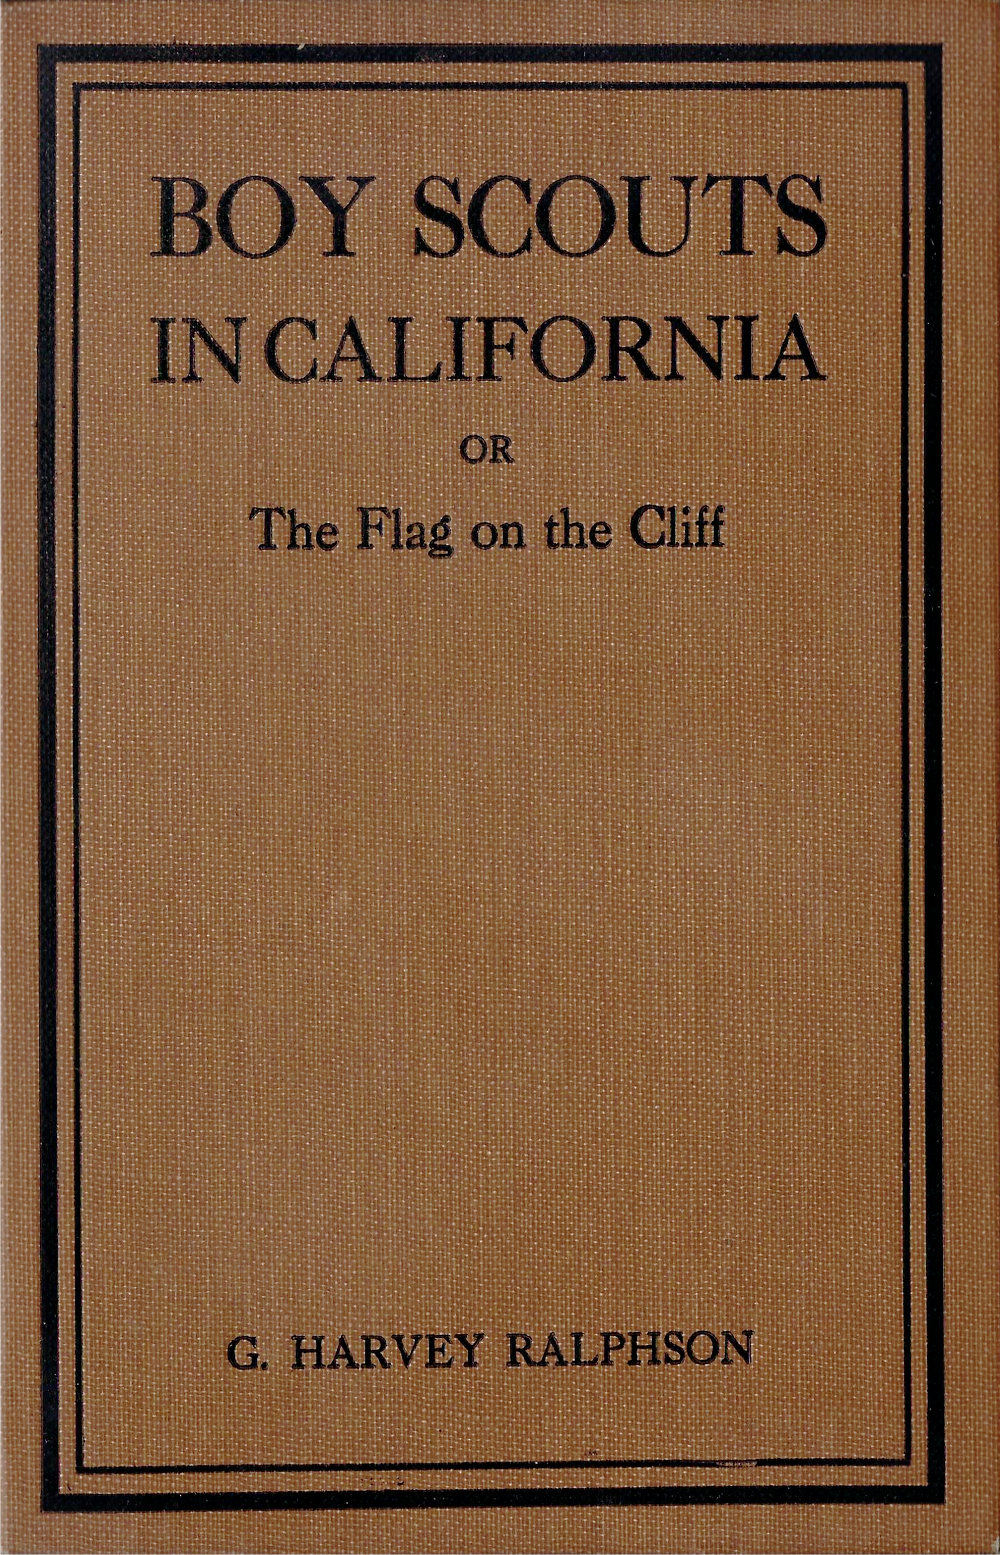 Boy Scouts in California, or The Flag on the Cliff